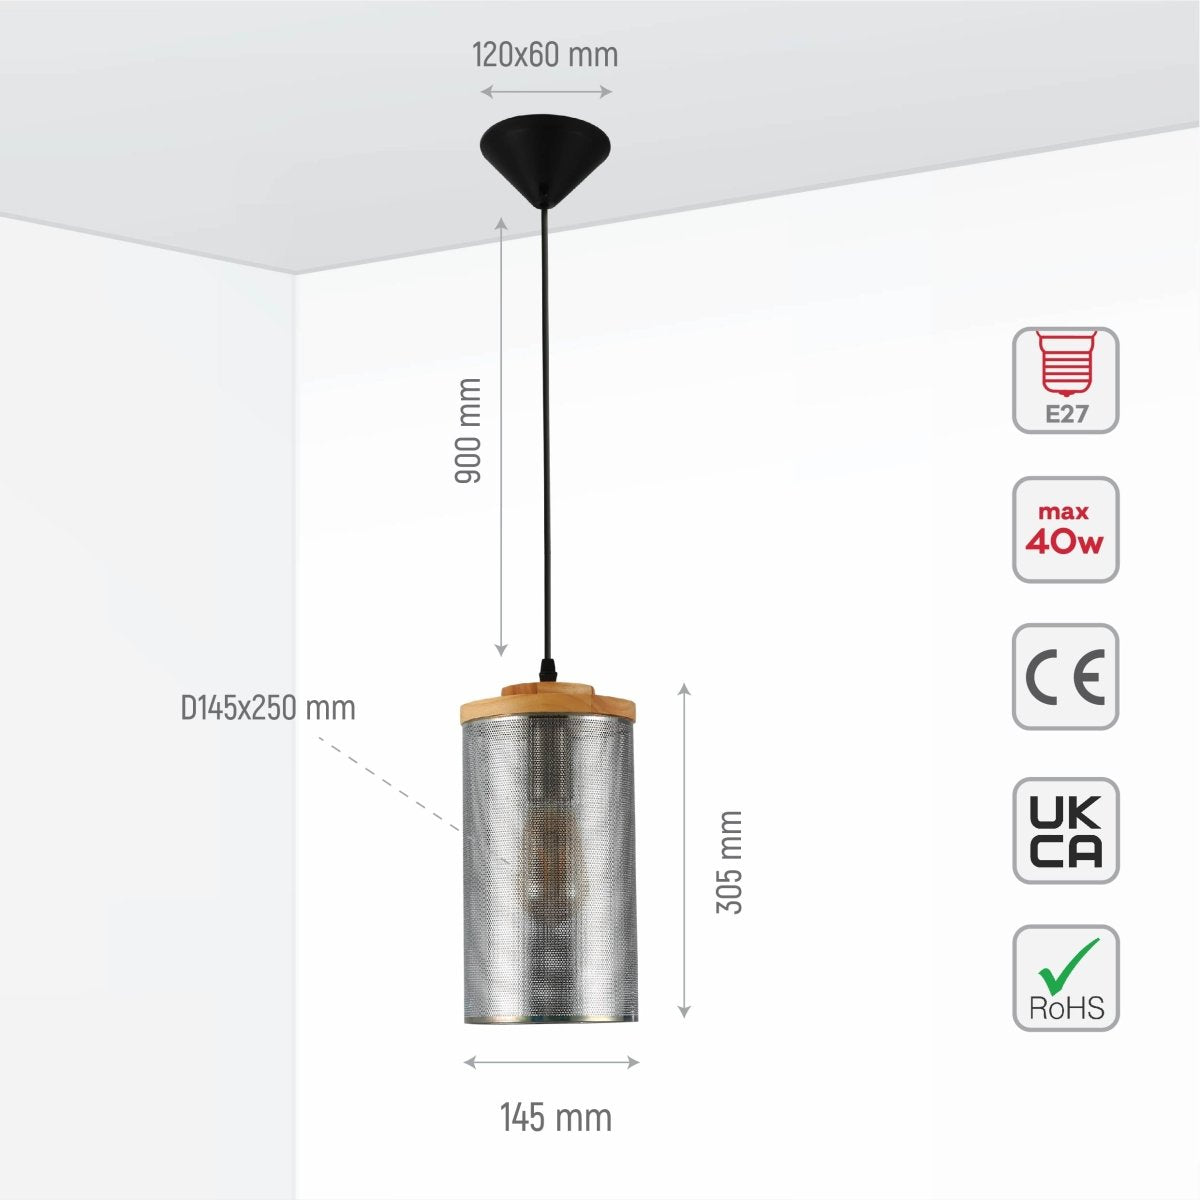 Size and specs of Sieve Chrome Cylinder Metal Pendant Ceiling Light D110 with E27 Fitting | TEKLED 158-19788